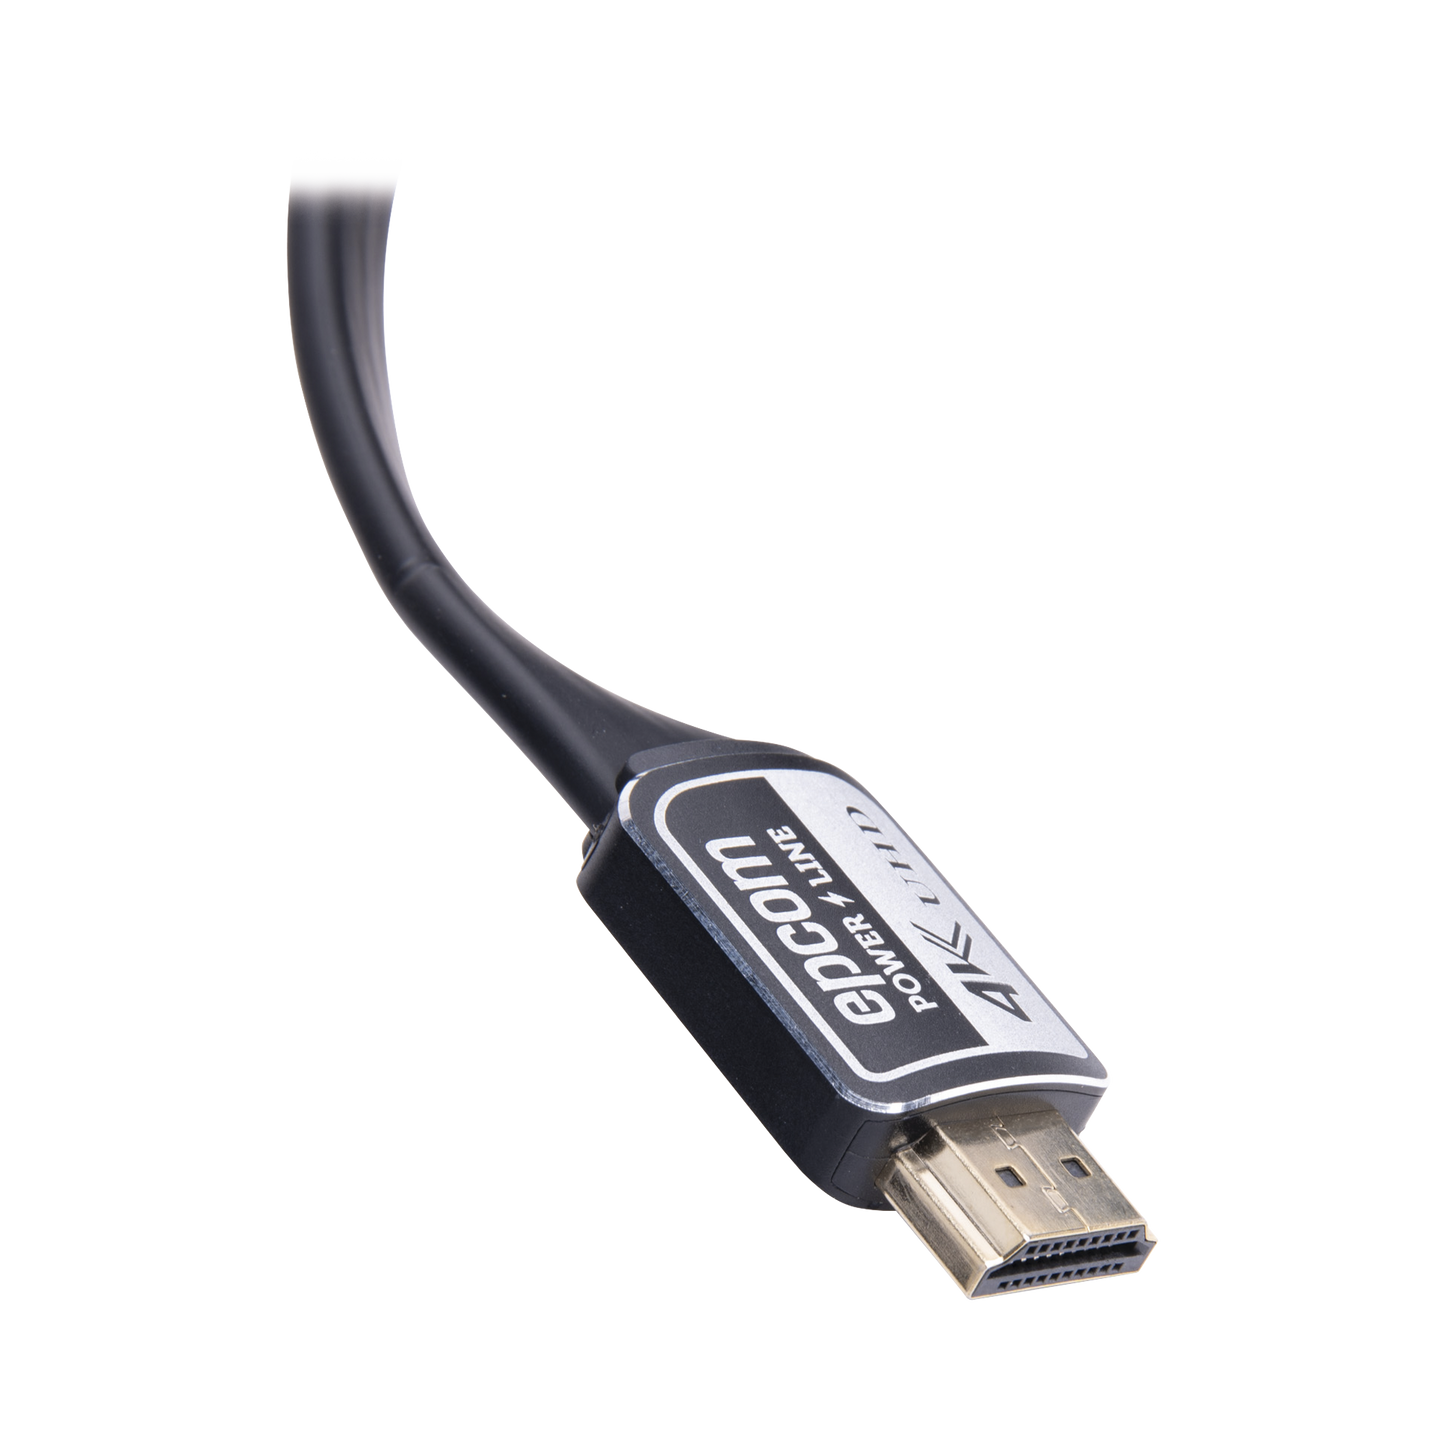 HDMI CABLE 2.0 version flat 1.8 MT ( 5.90 FT ) optimized for 4K ULTRA HD